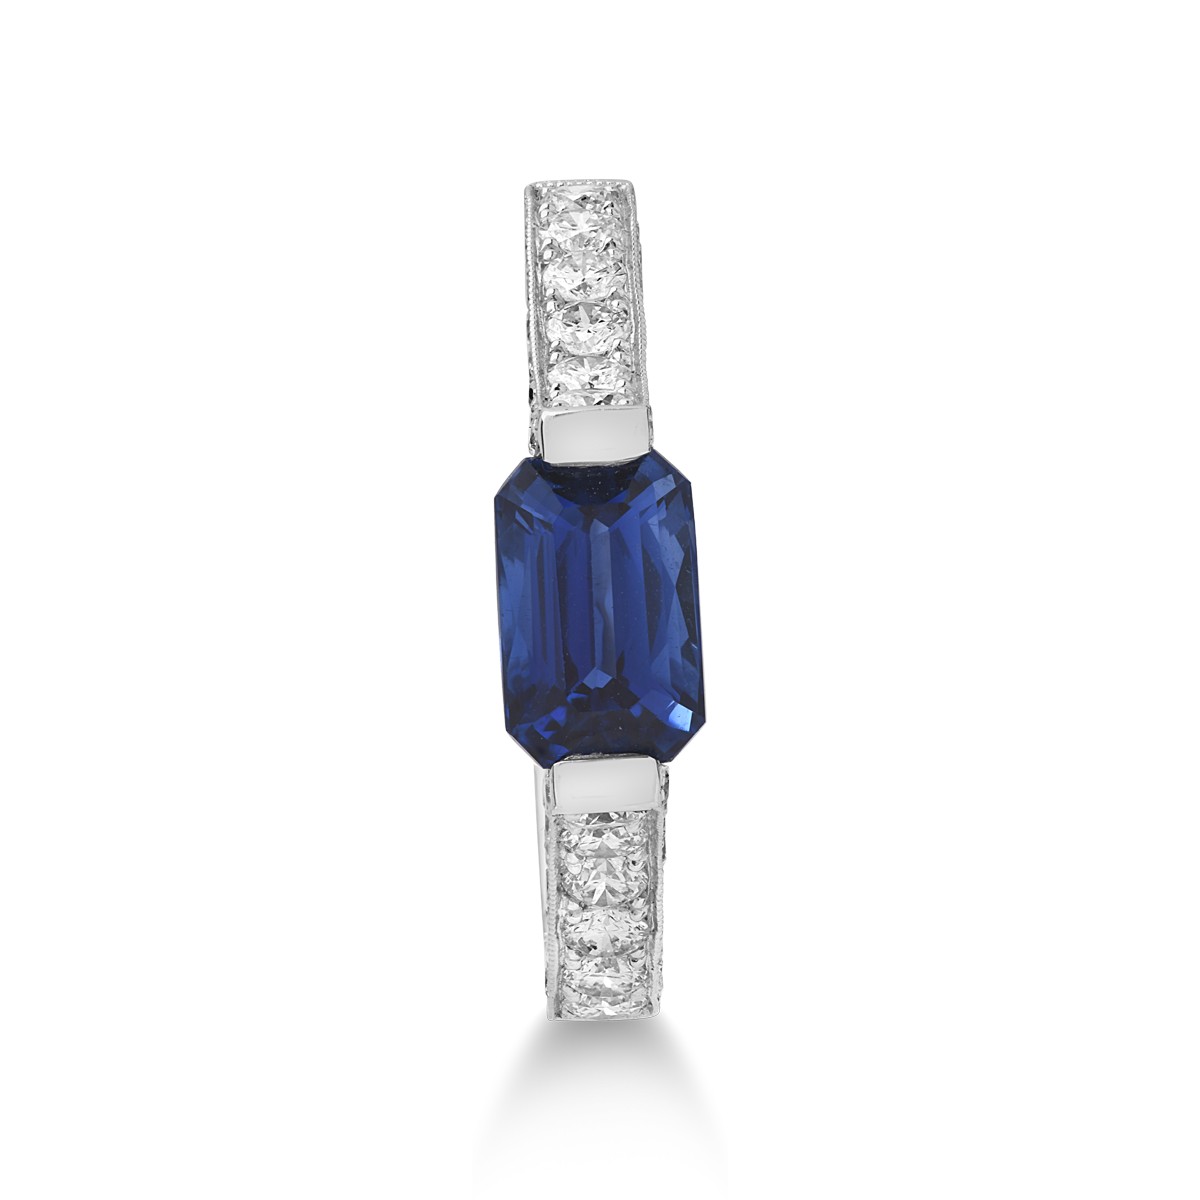 18Kt white gold ring with 1.46ct sapphire and 0.9ct diamonds